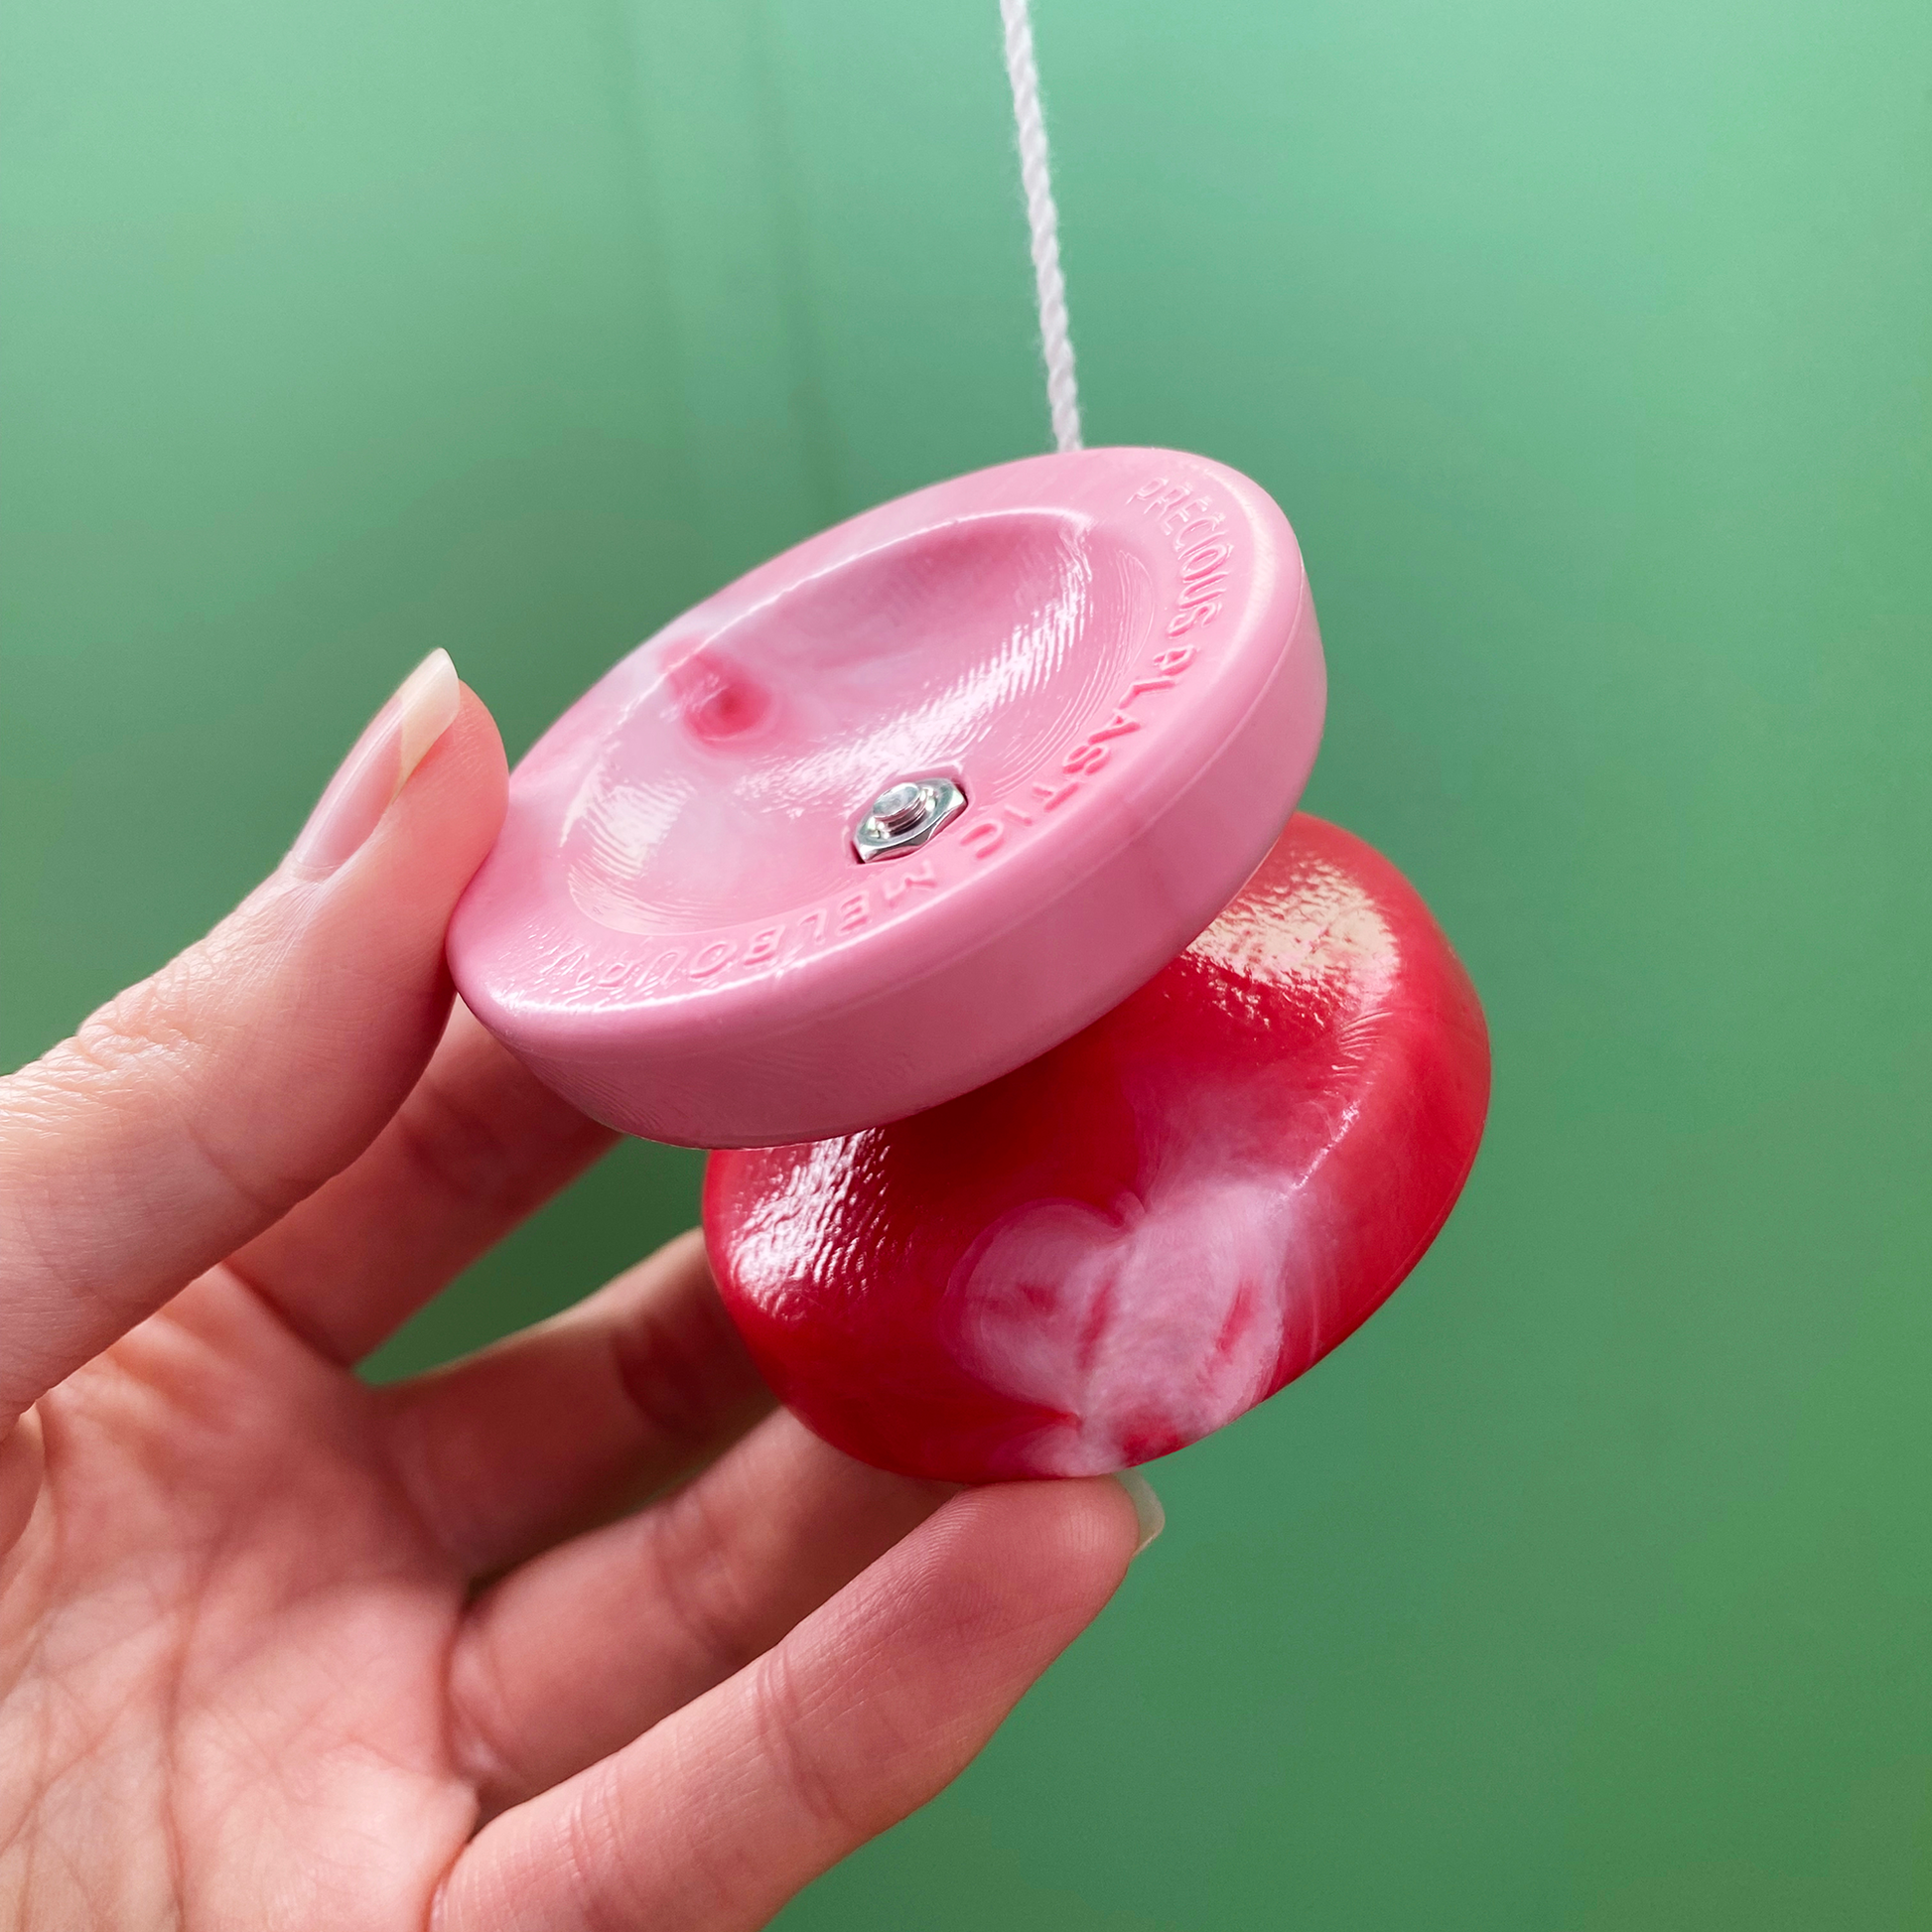 Make your own yo-yo's from recycled plastic